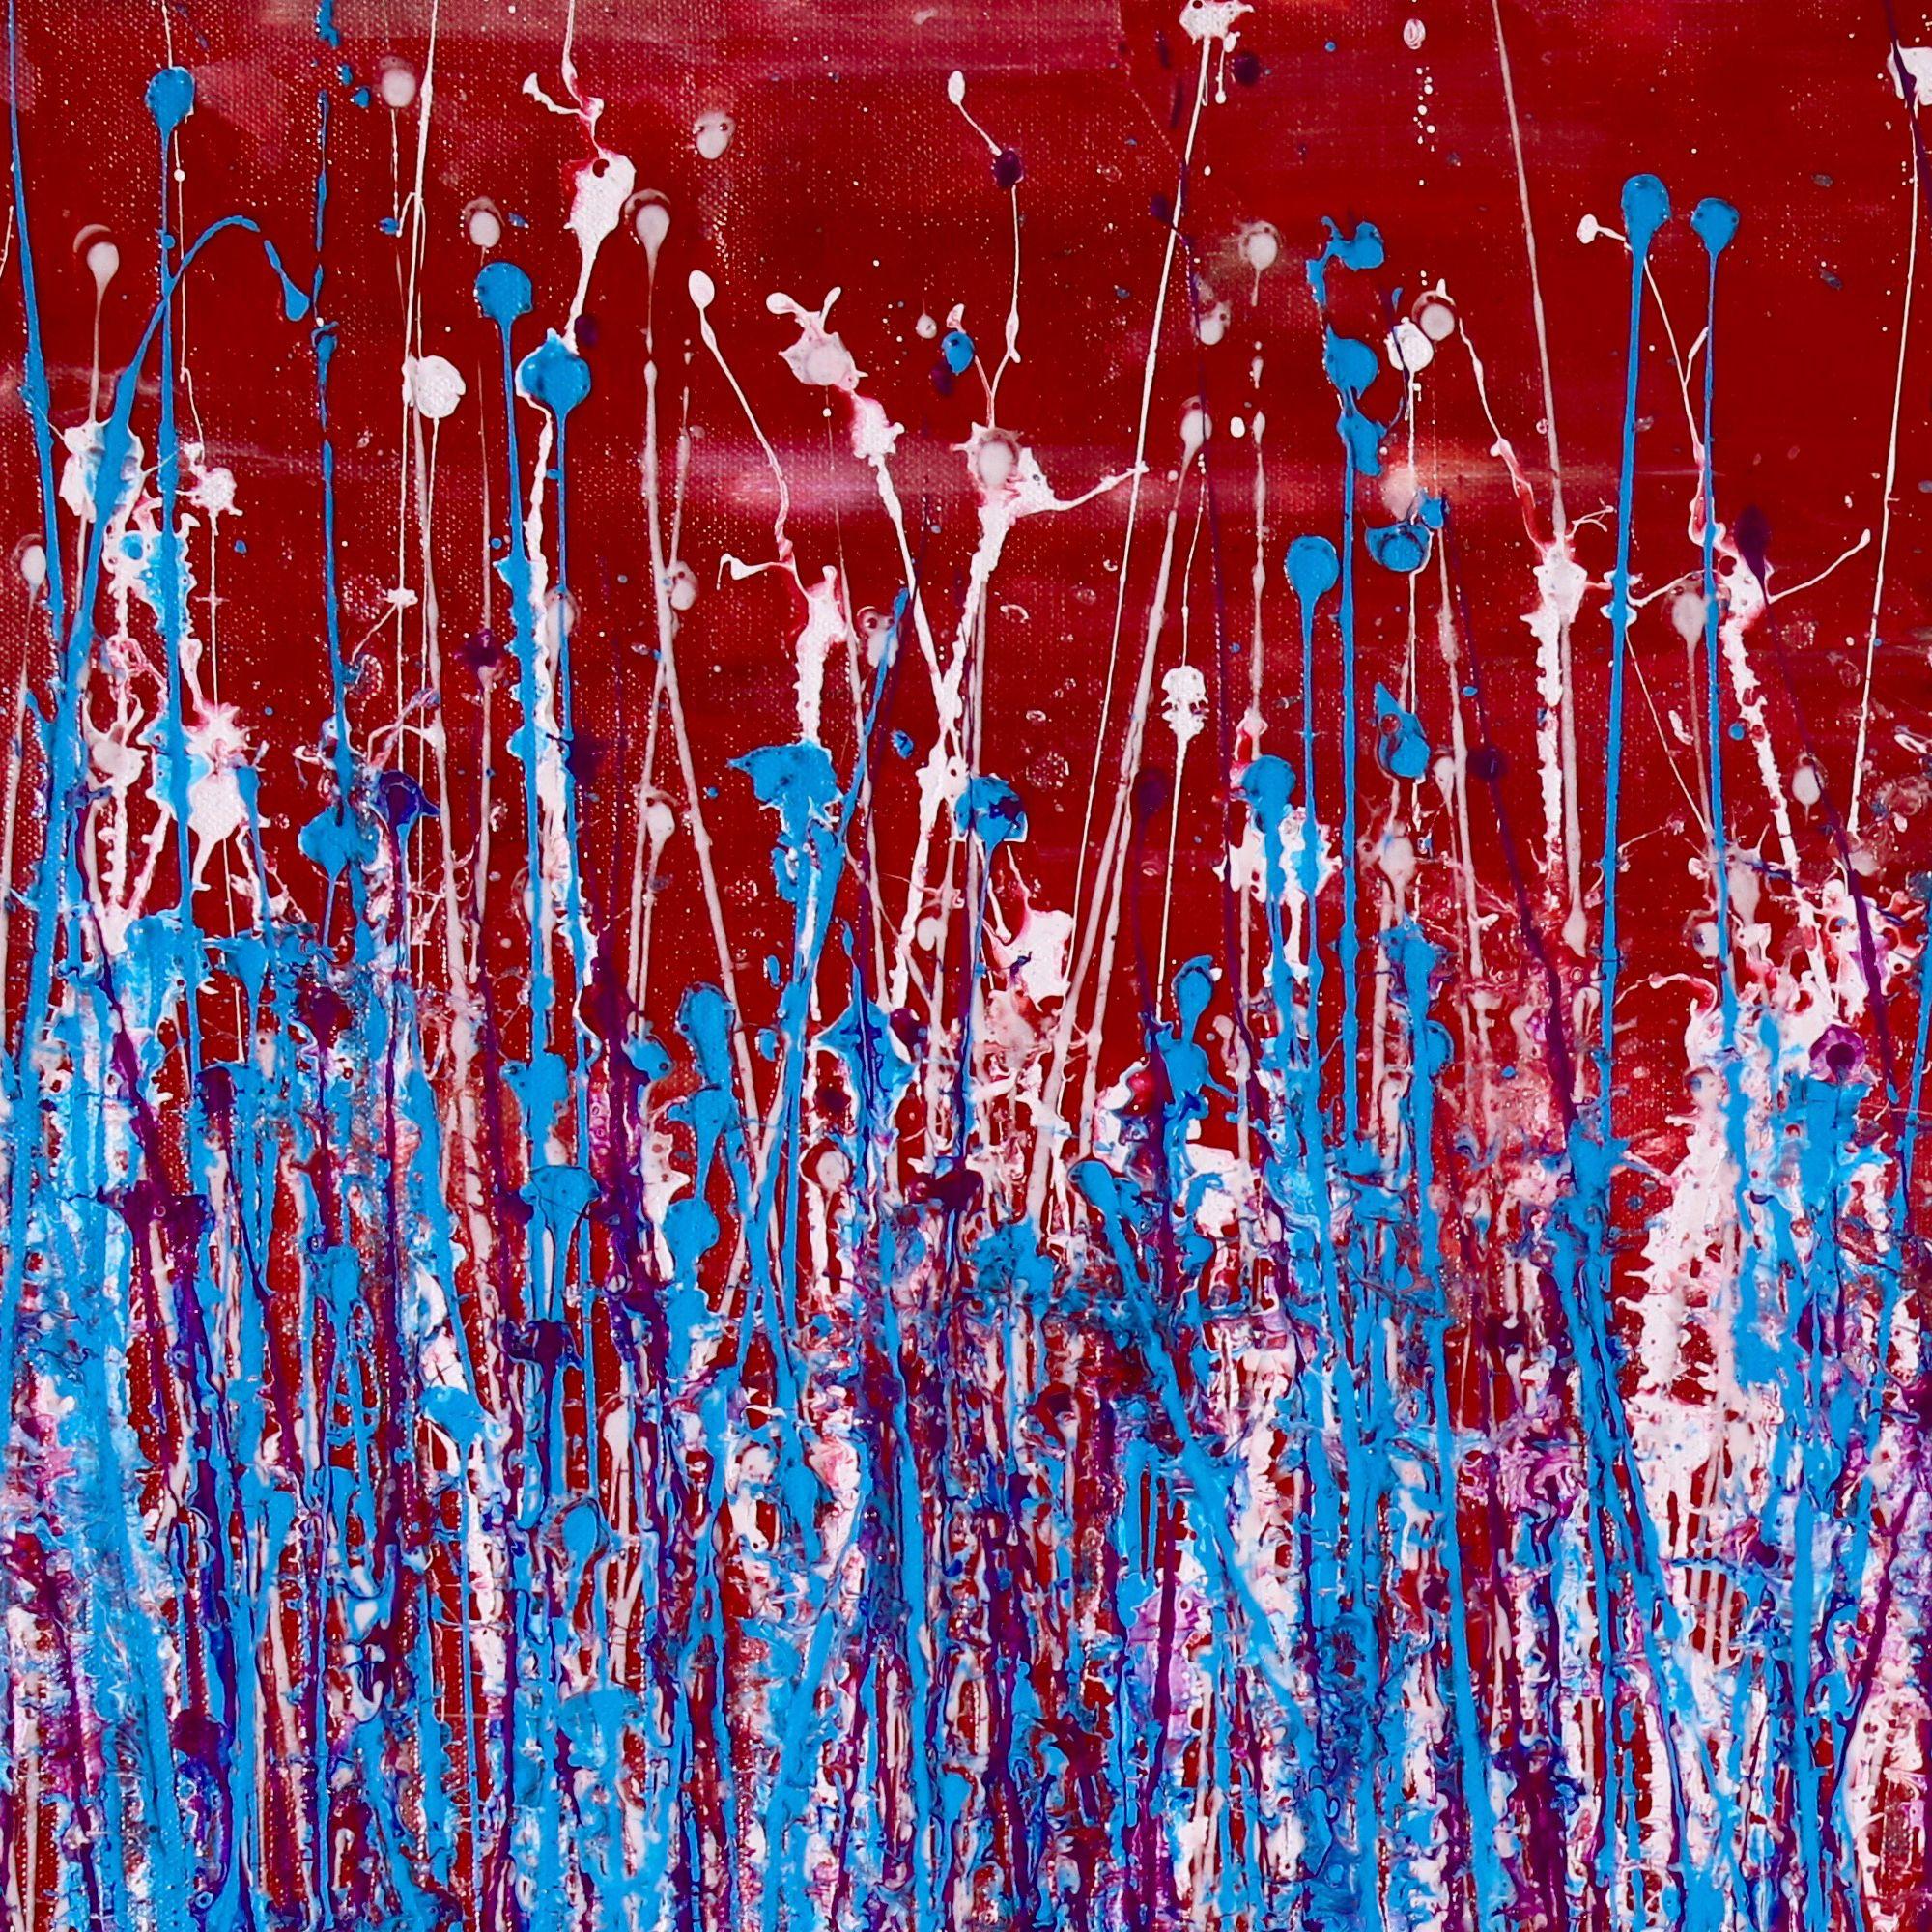 Expressionism bold colors from a dark red background to bright blue, iridescent purple and white. Very spontaneous feel and action packed!     This painting is on loose canvas and ships in a tube. This painting is signed in front, plenty of edge for